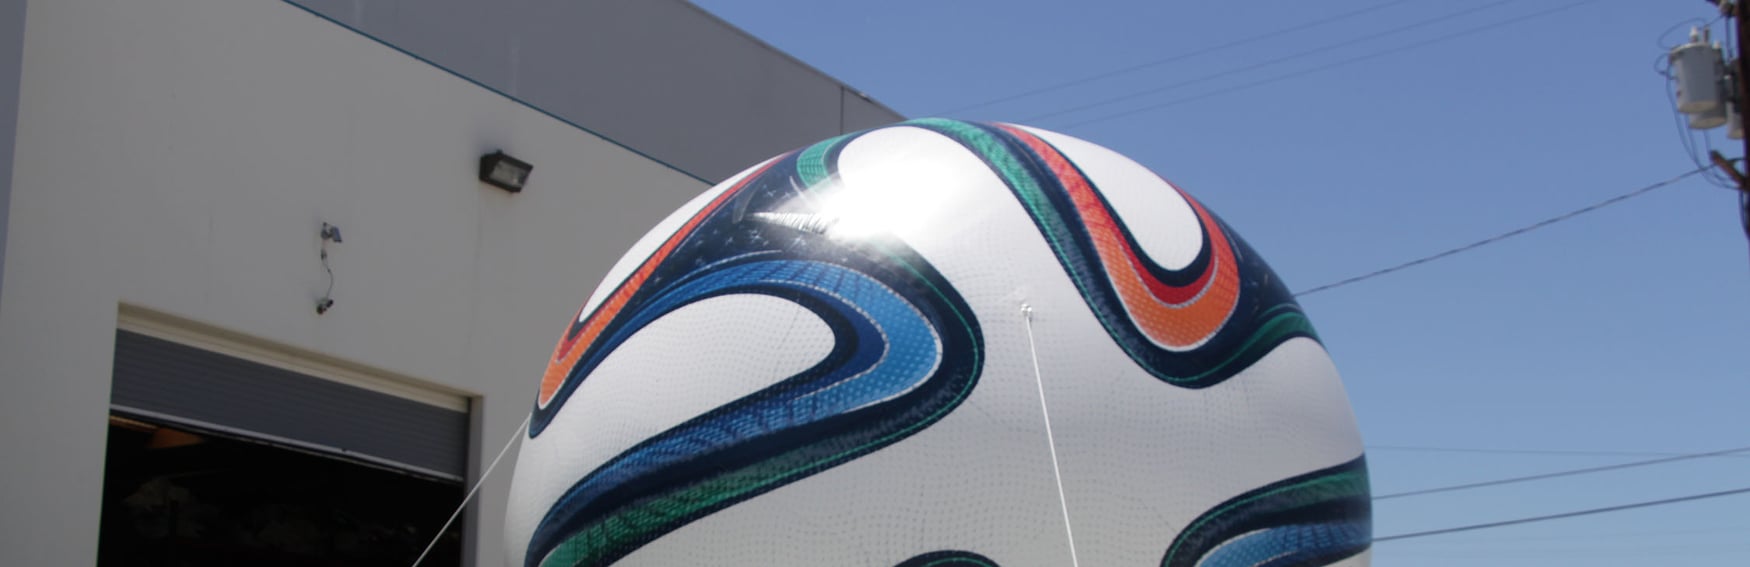 inflatable-soccer-ball-sky-cropped.jpg